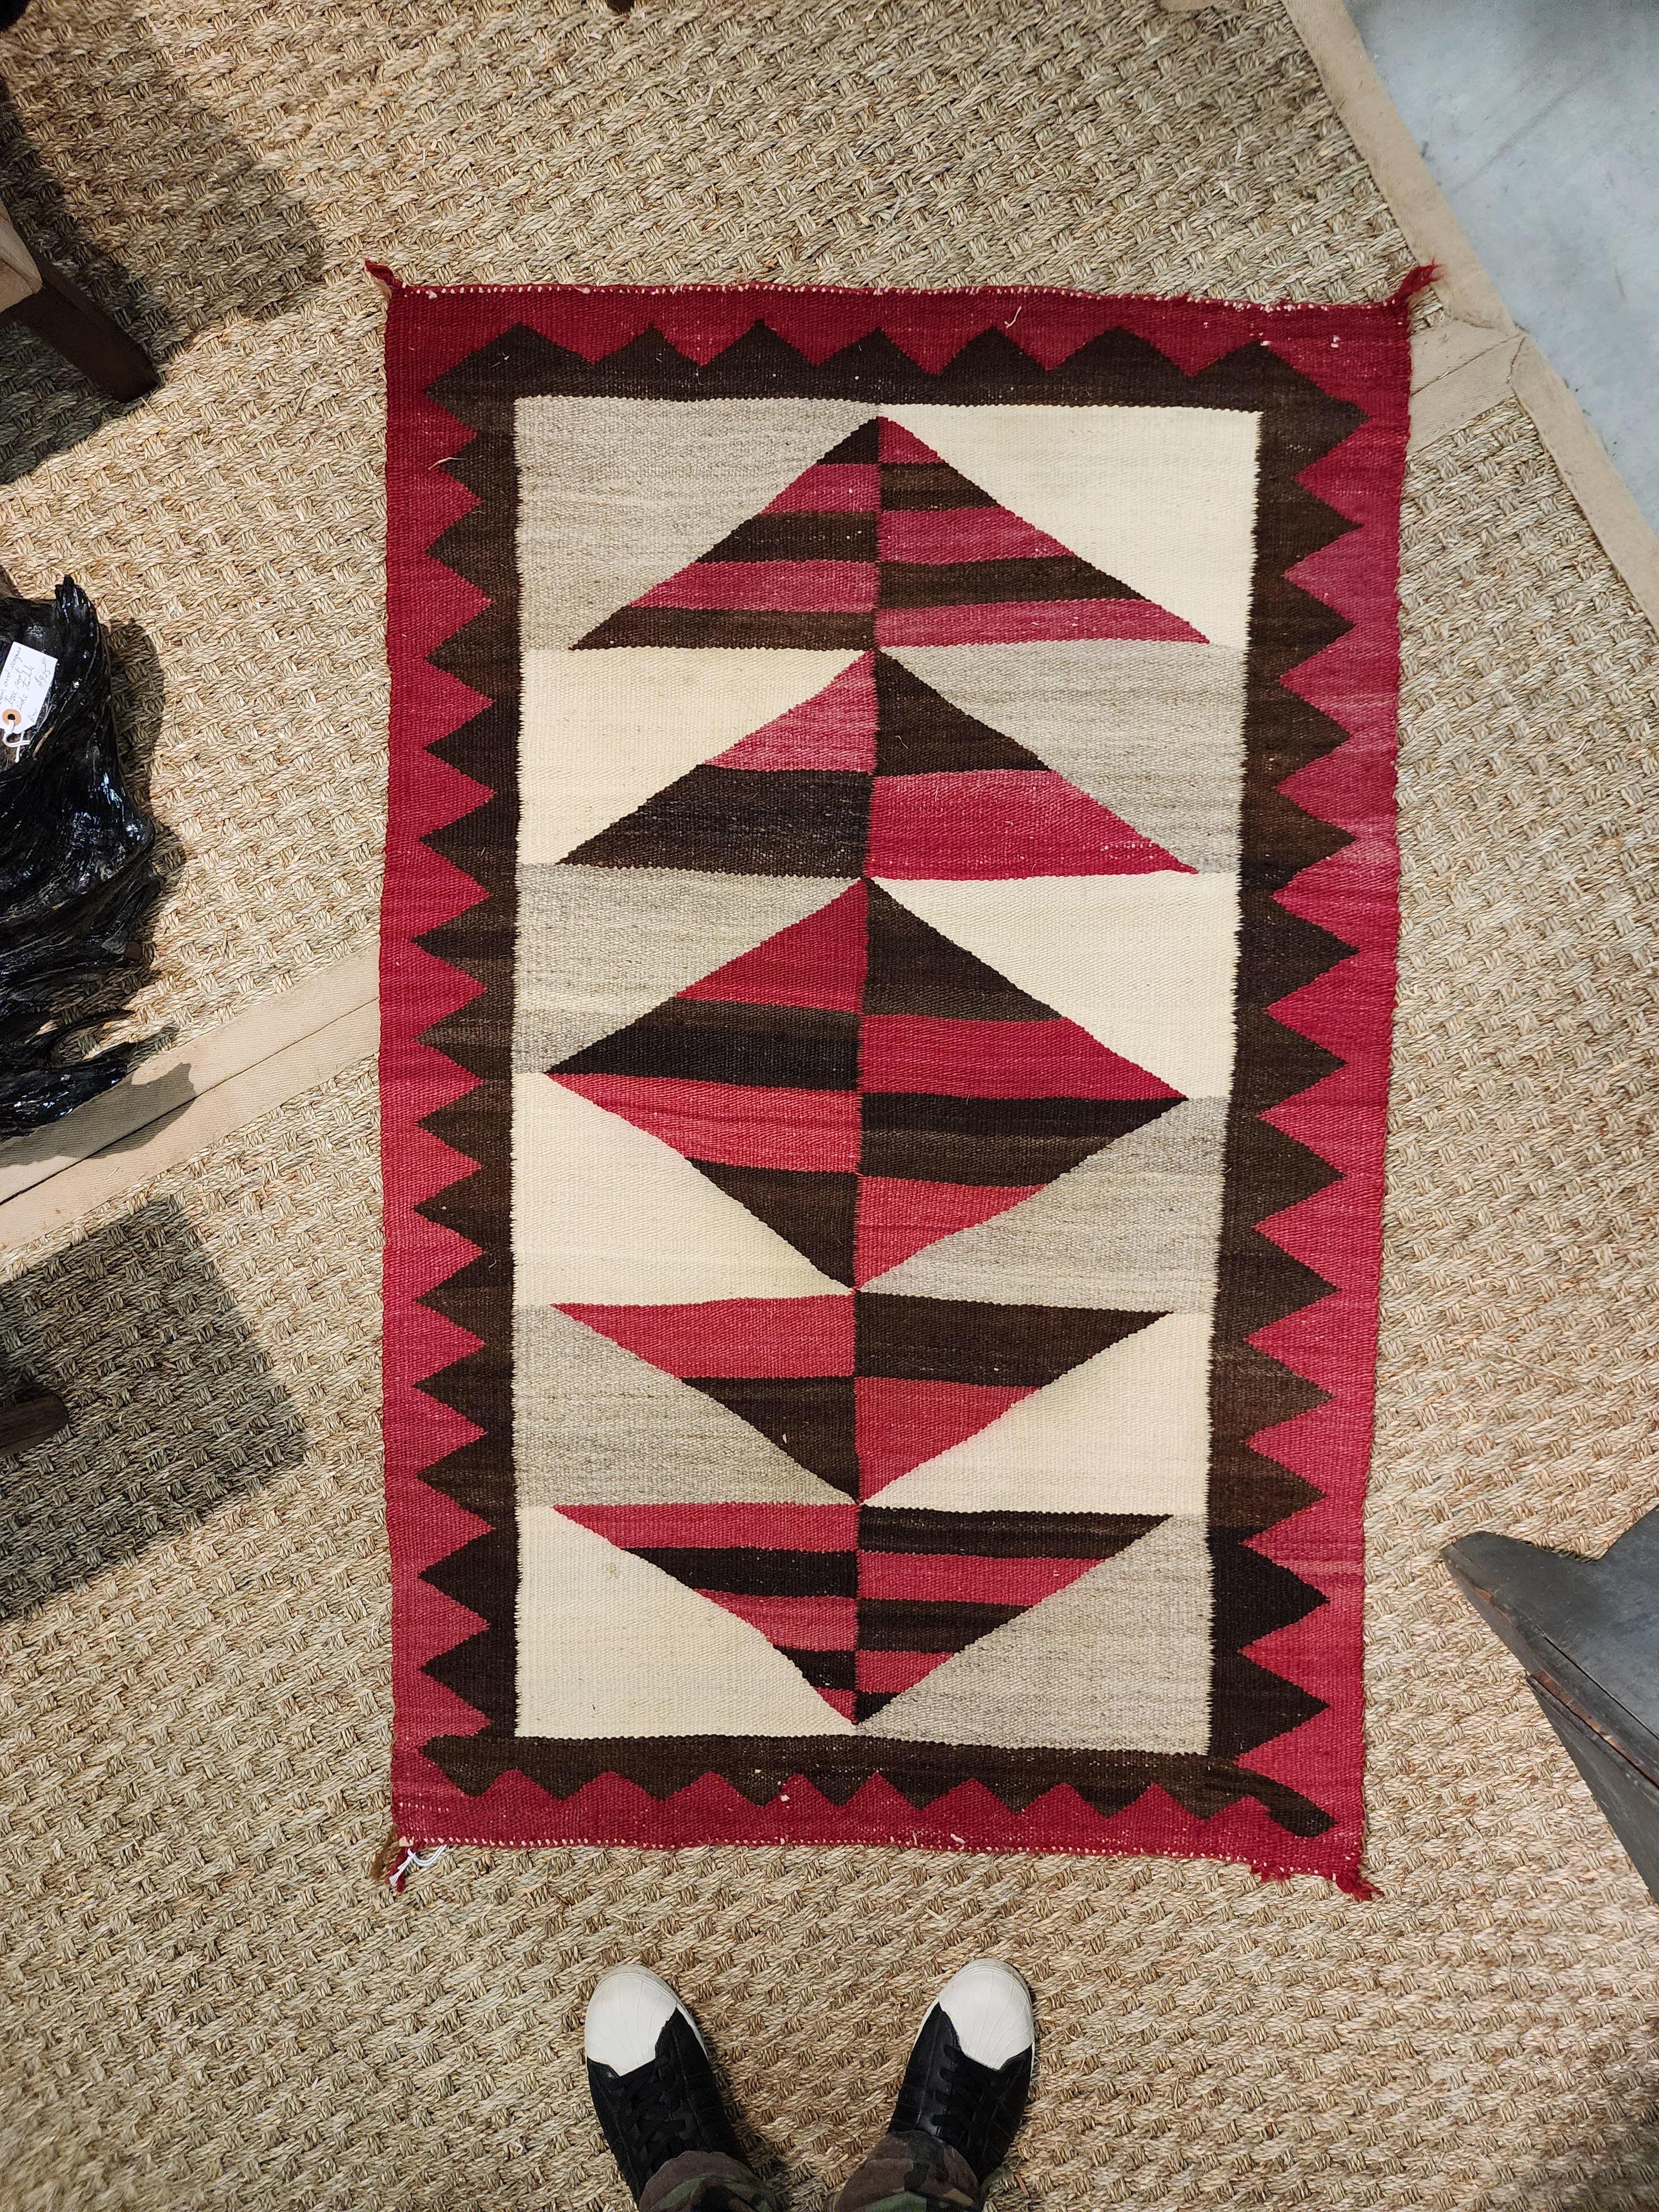 Circa 1890 Navajo weaving with a very elegant and modern design. Nice mottling of the natural colors, especially in the reds. This is a very bold weaving. This weaving is in good as found condition. Please examine all photographs and video carefully